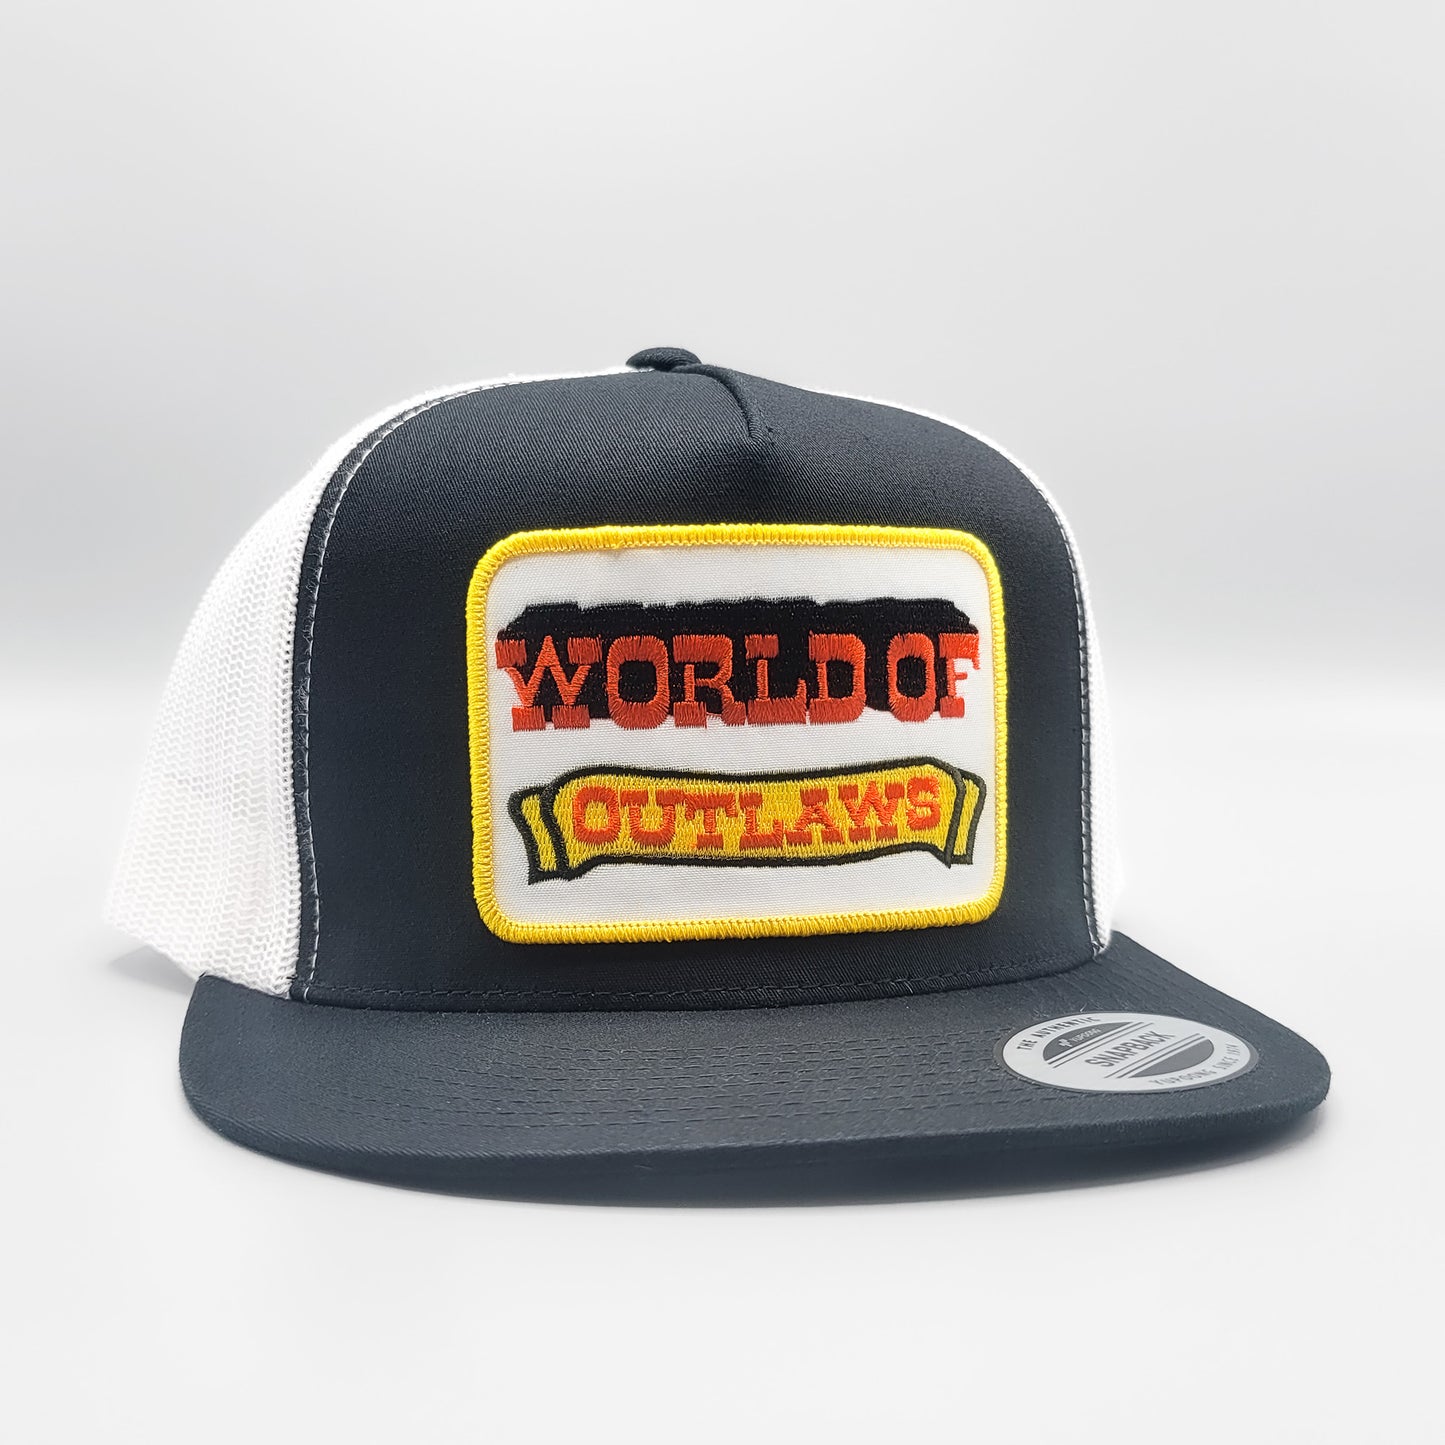 World of Outlaws Racing Series Trucker